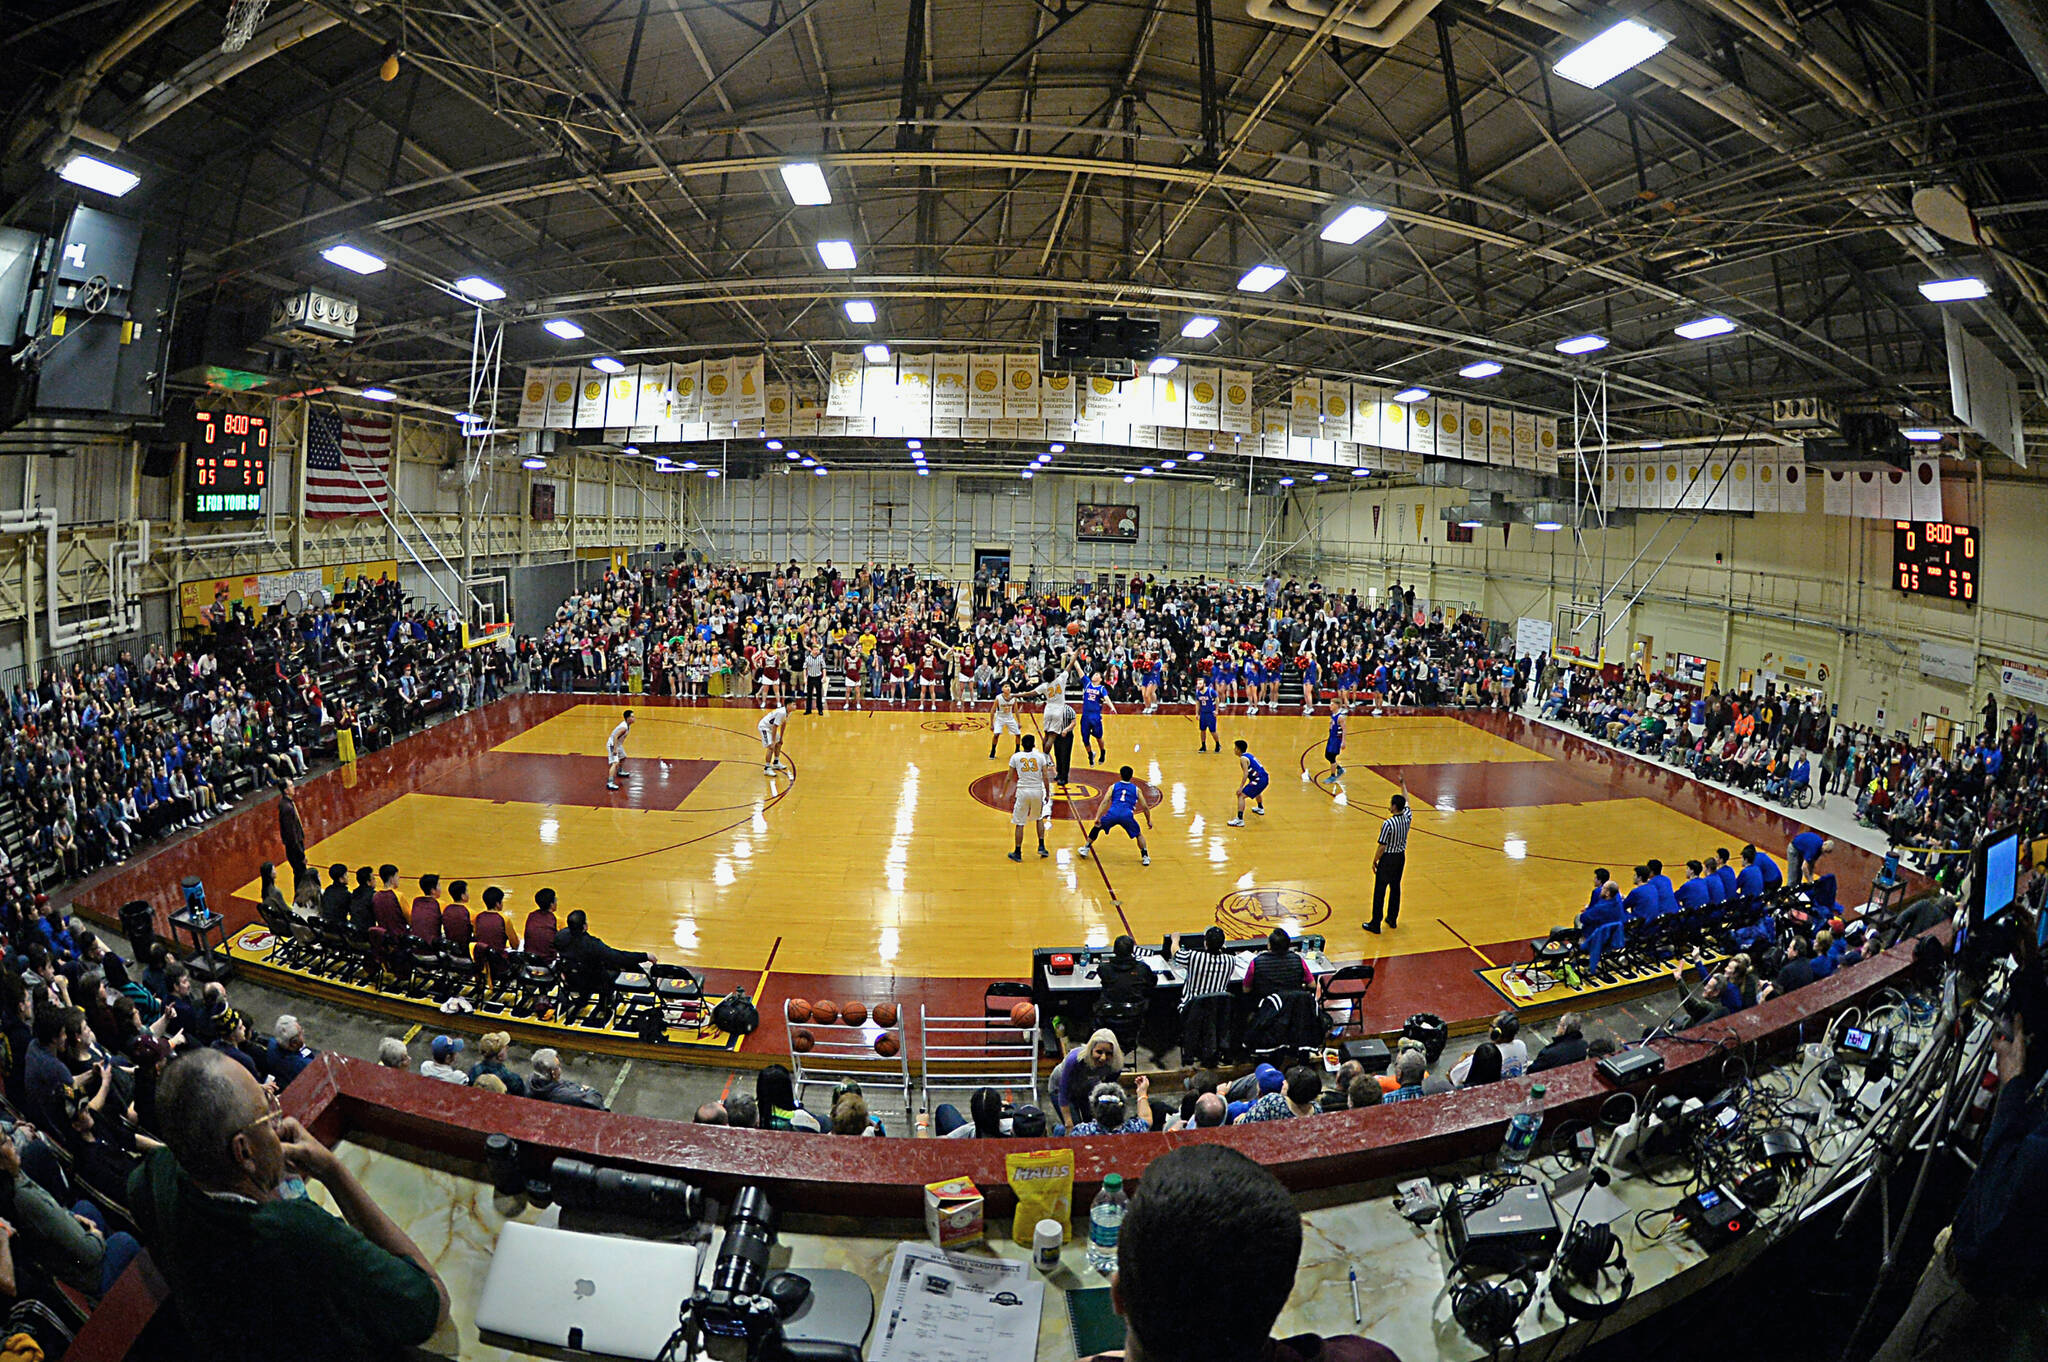 A Region V tournament game featuring the Mt. Edgecumbe Braves and Sitka Wolves begins at Mt. Edgecumbe High School’s B.J. McGillis gymnasium in 2019. (Photo by Klas Stolpe)